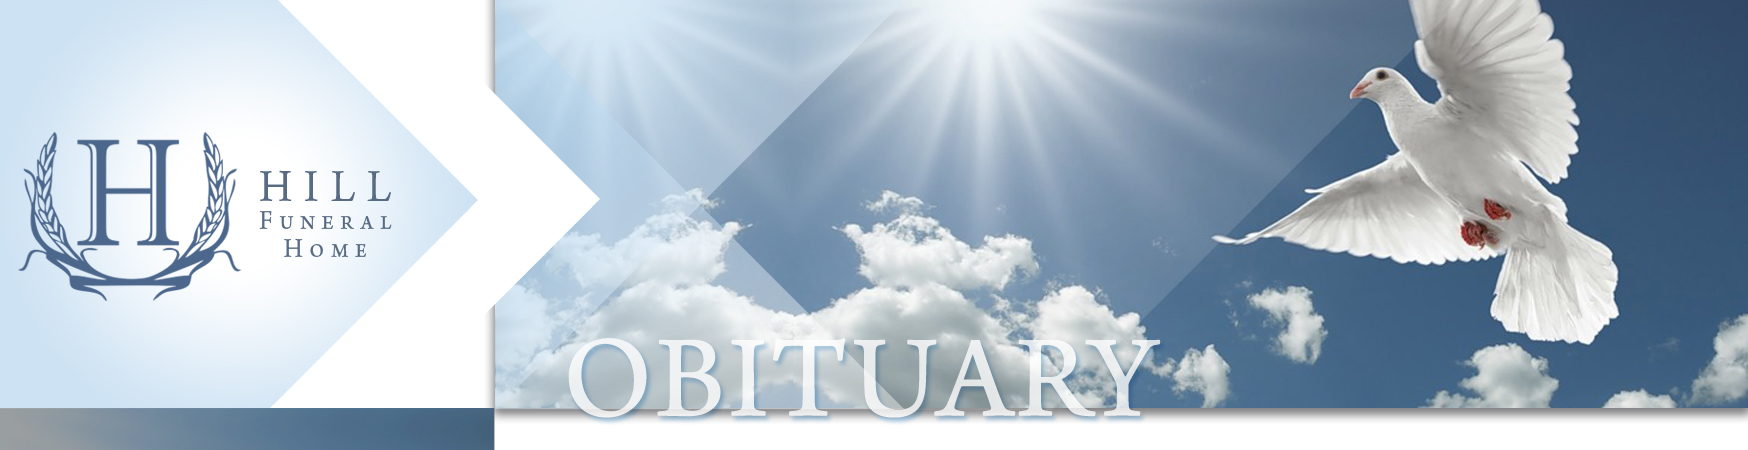 Earl Henry Baird Obituary - Hill Funeral Home